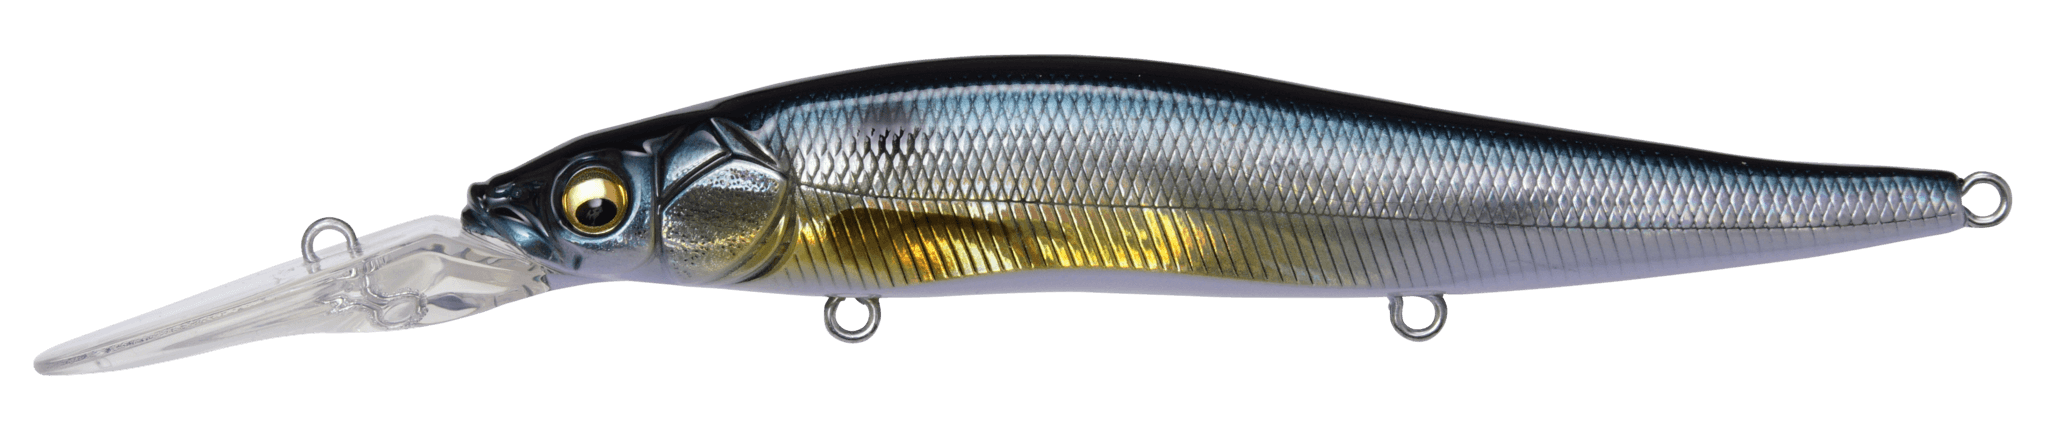 Megabass Vision 110 +2 - GG Threadfin Shad - The Tackle Trap